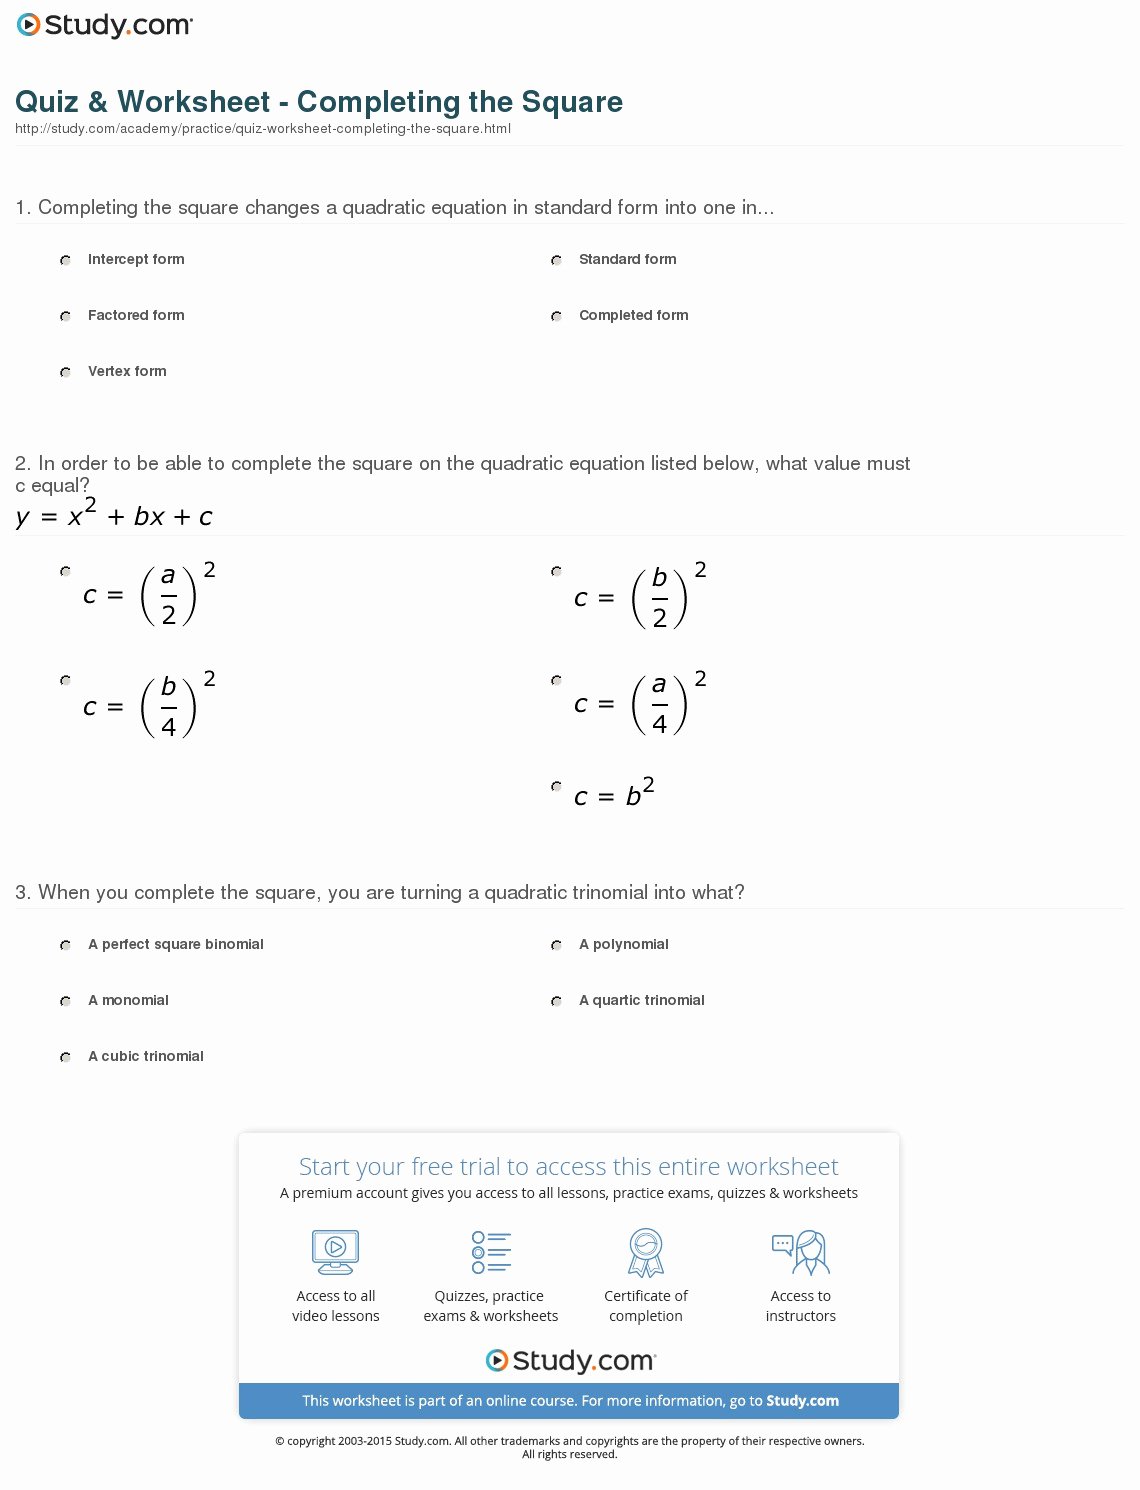 Completing the Square Worksheet Beautiful Quadratic Equations Worksheet with Answers